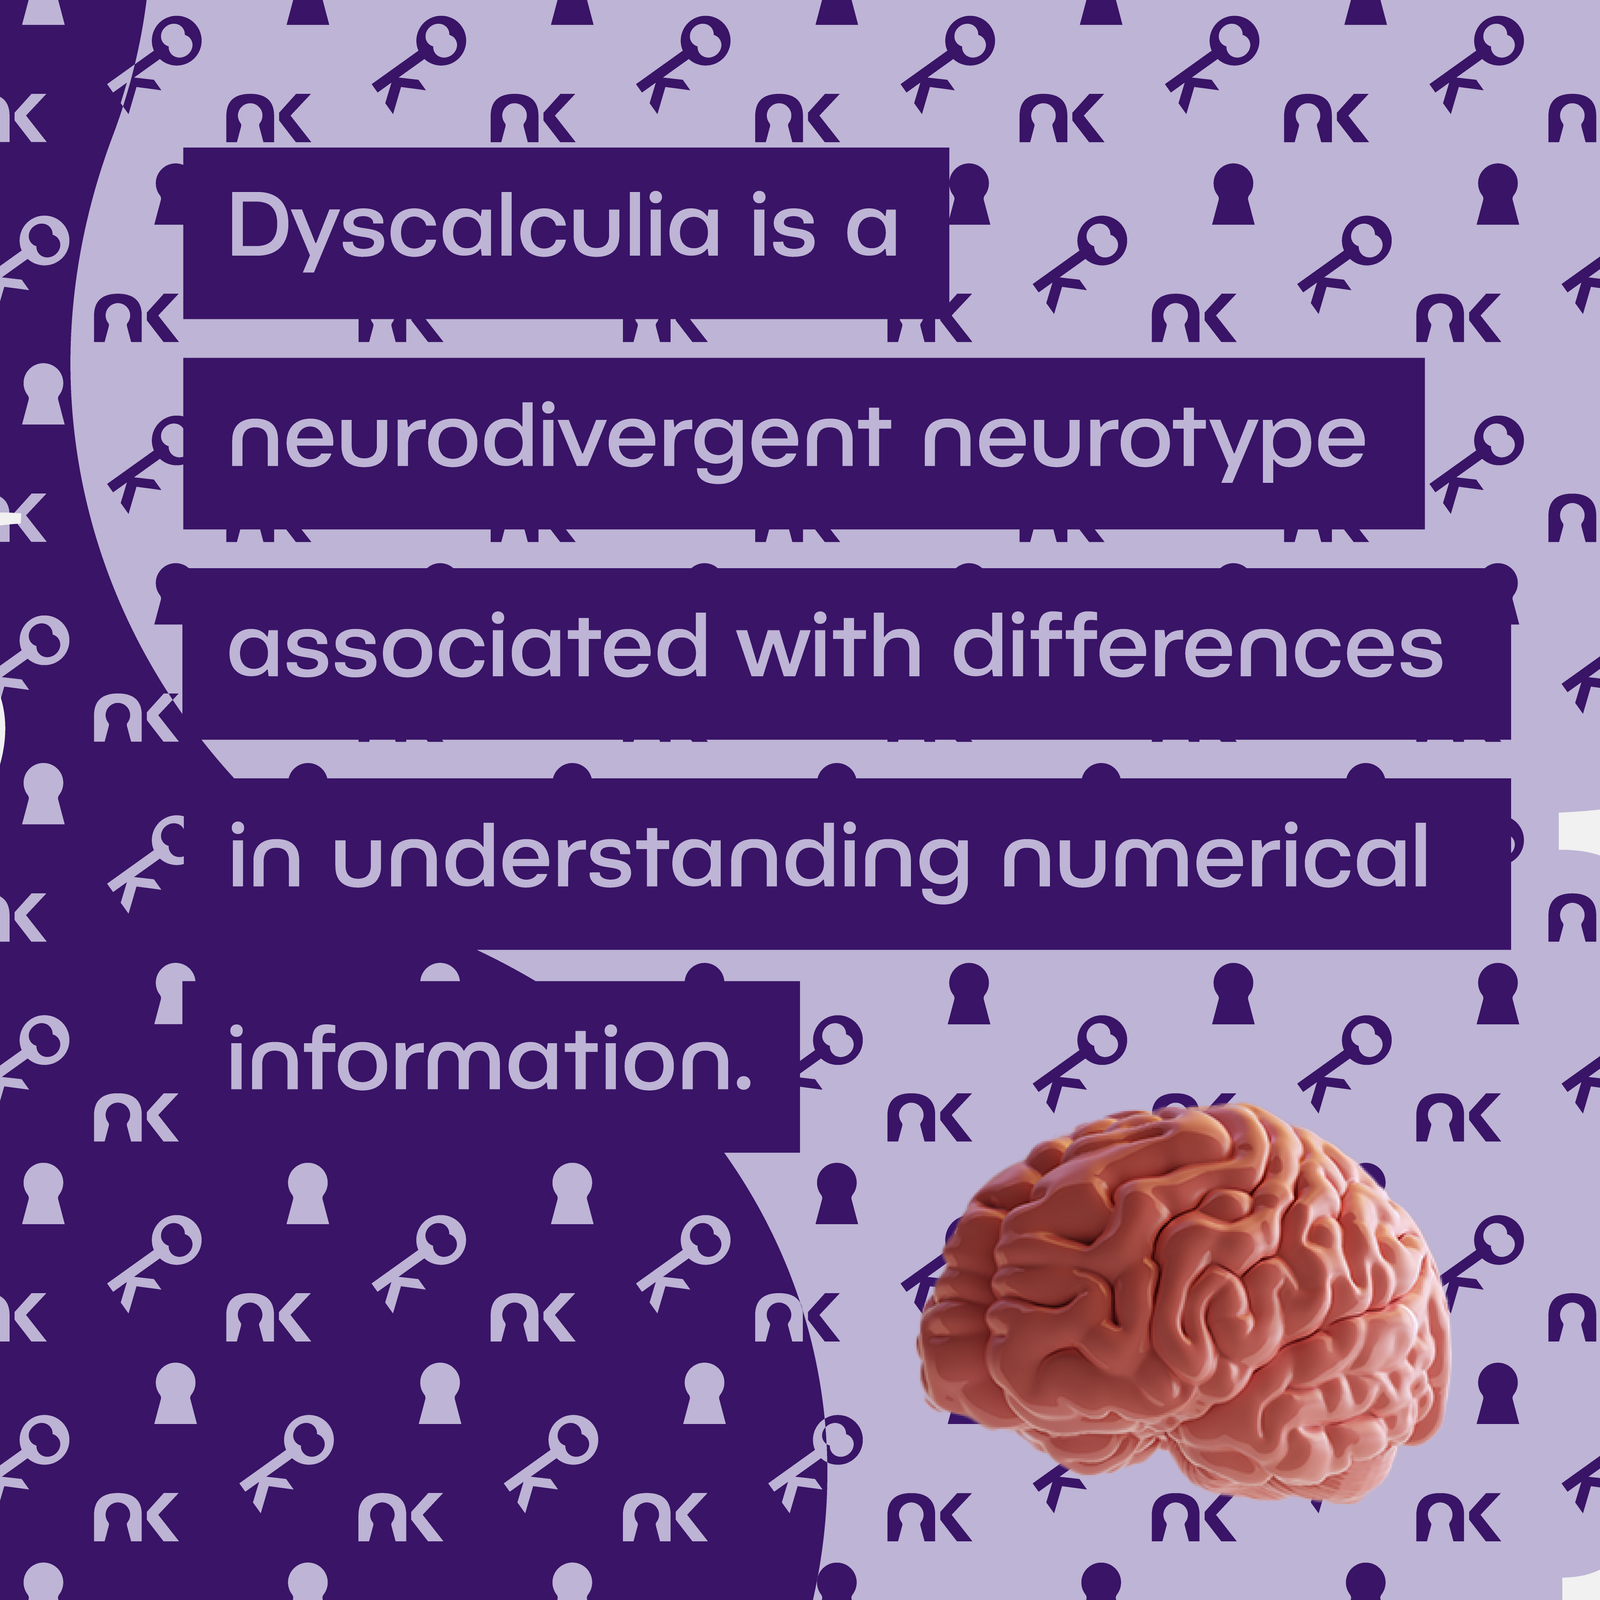 Text says: "Dyscalculia is a neurodivergent neurotype associated with differences in understanding numerical information." next to a 3D floating pink brain.